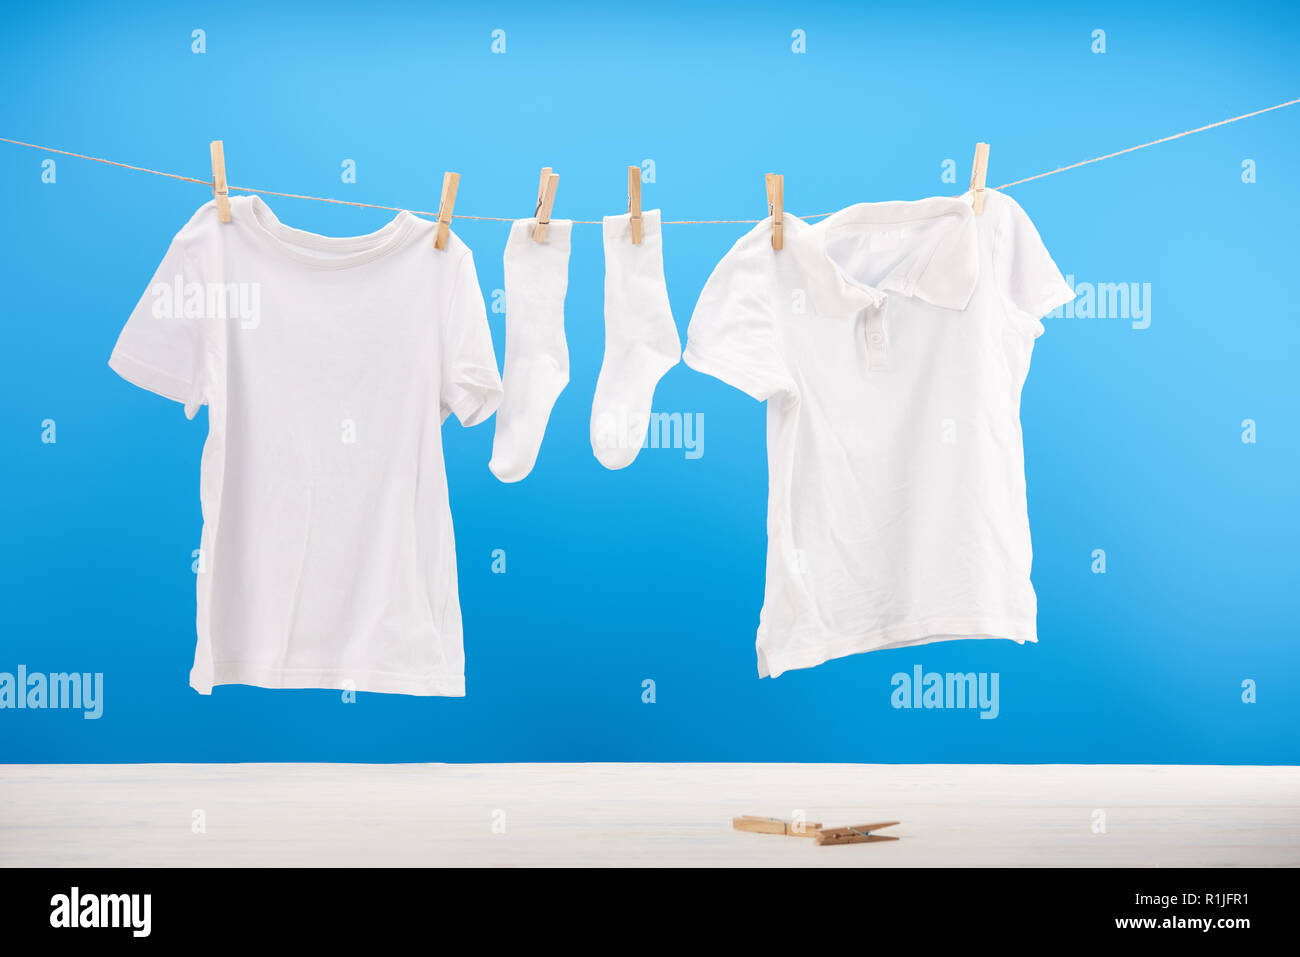 clean white socks and t-shirts hanging on clothesline on blue Stock Photo